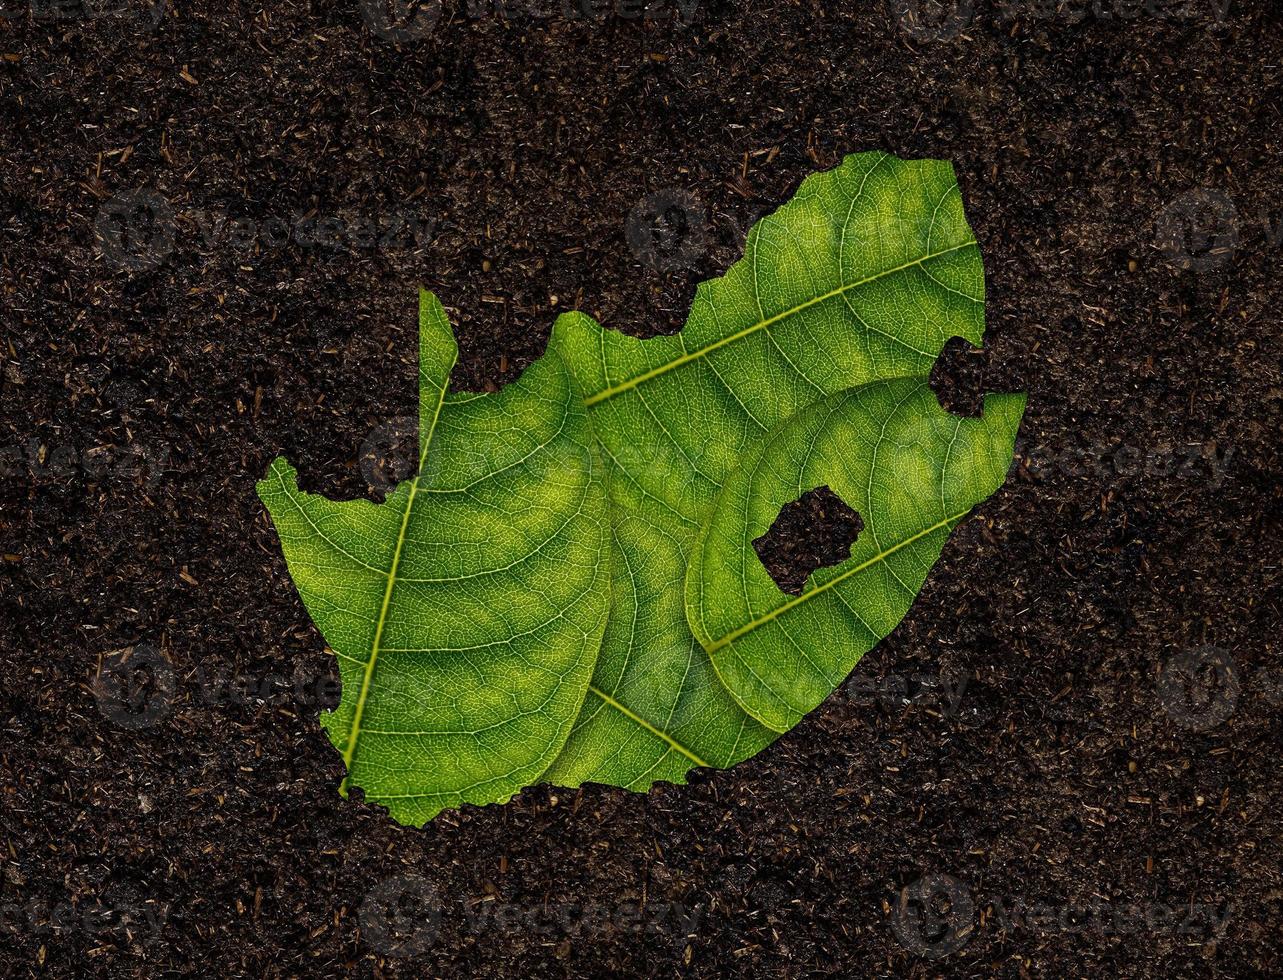 South Africa map made of green leaves on soil background ecology concept photo